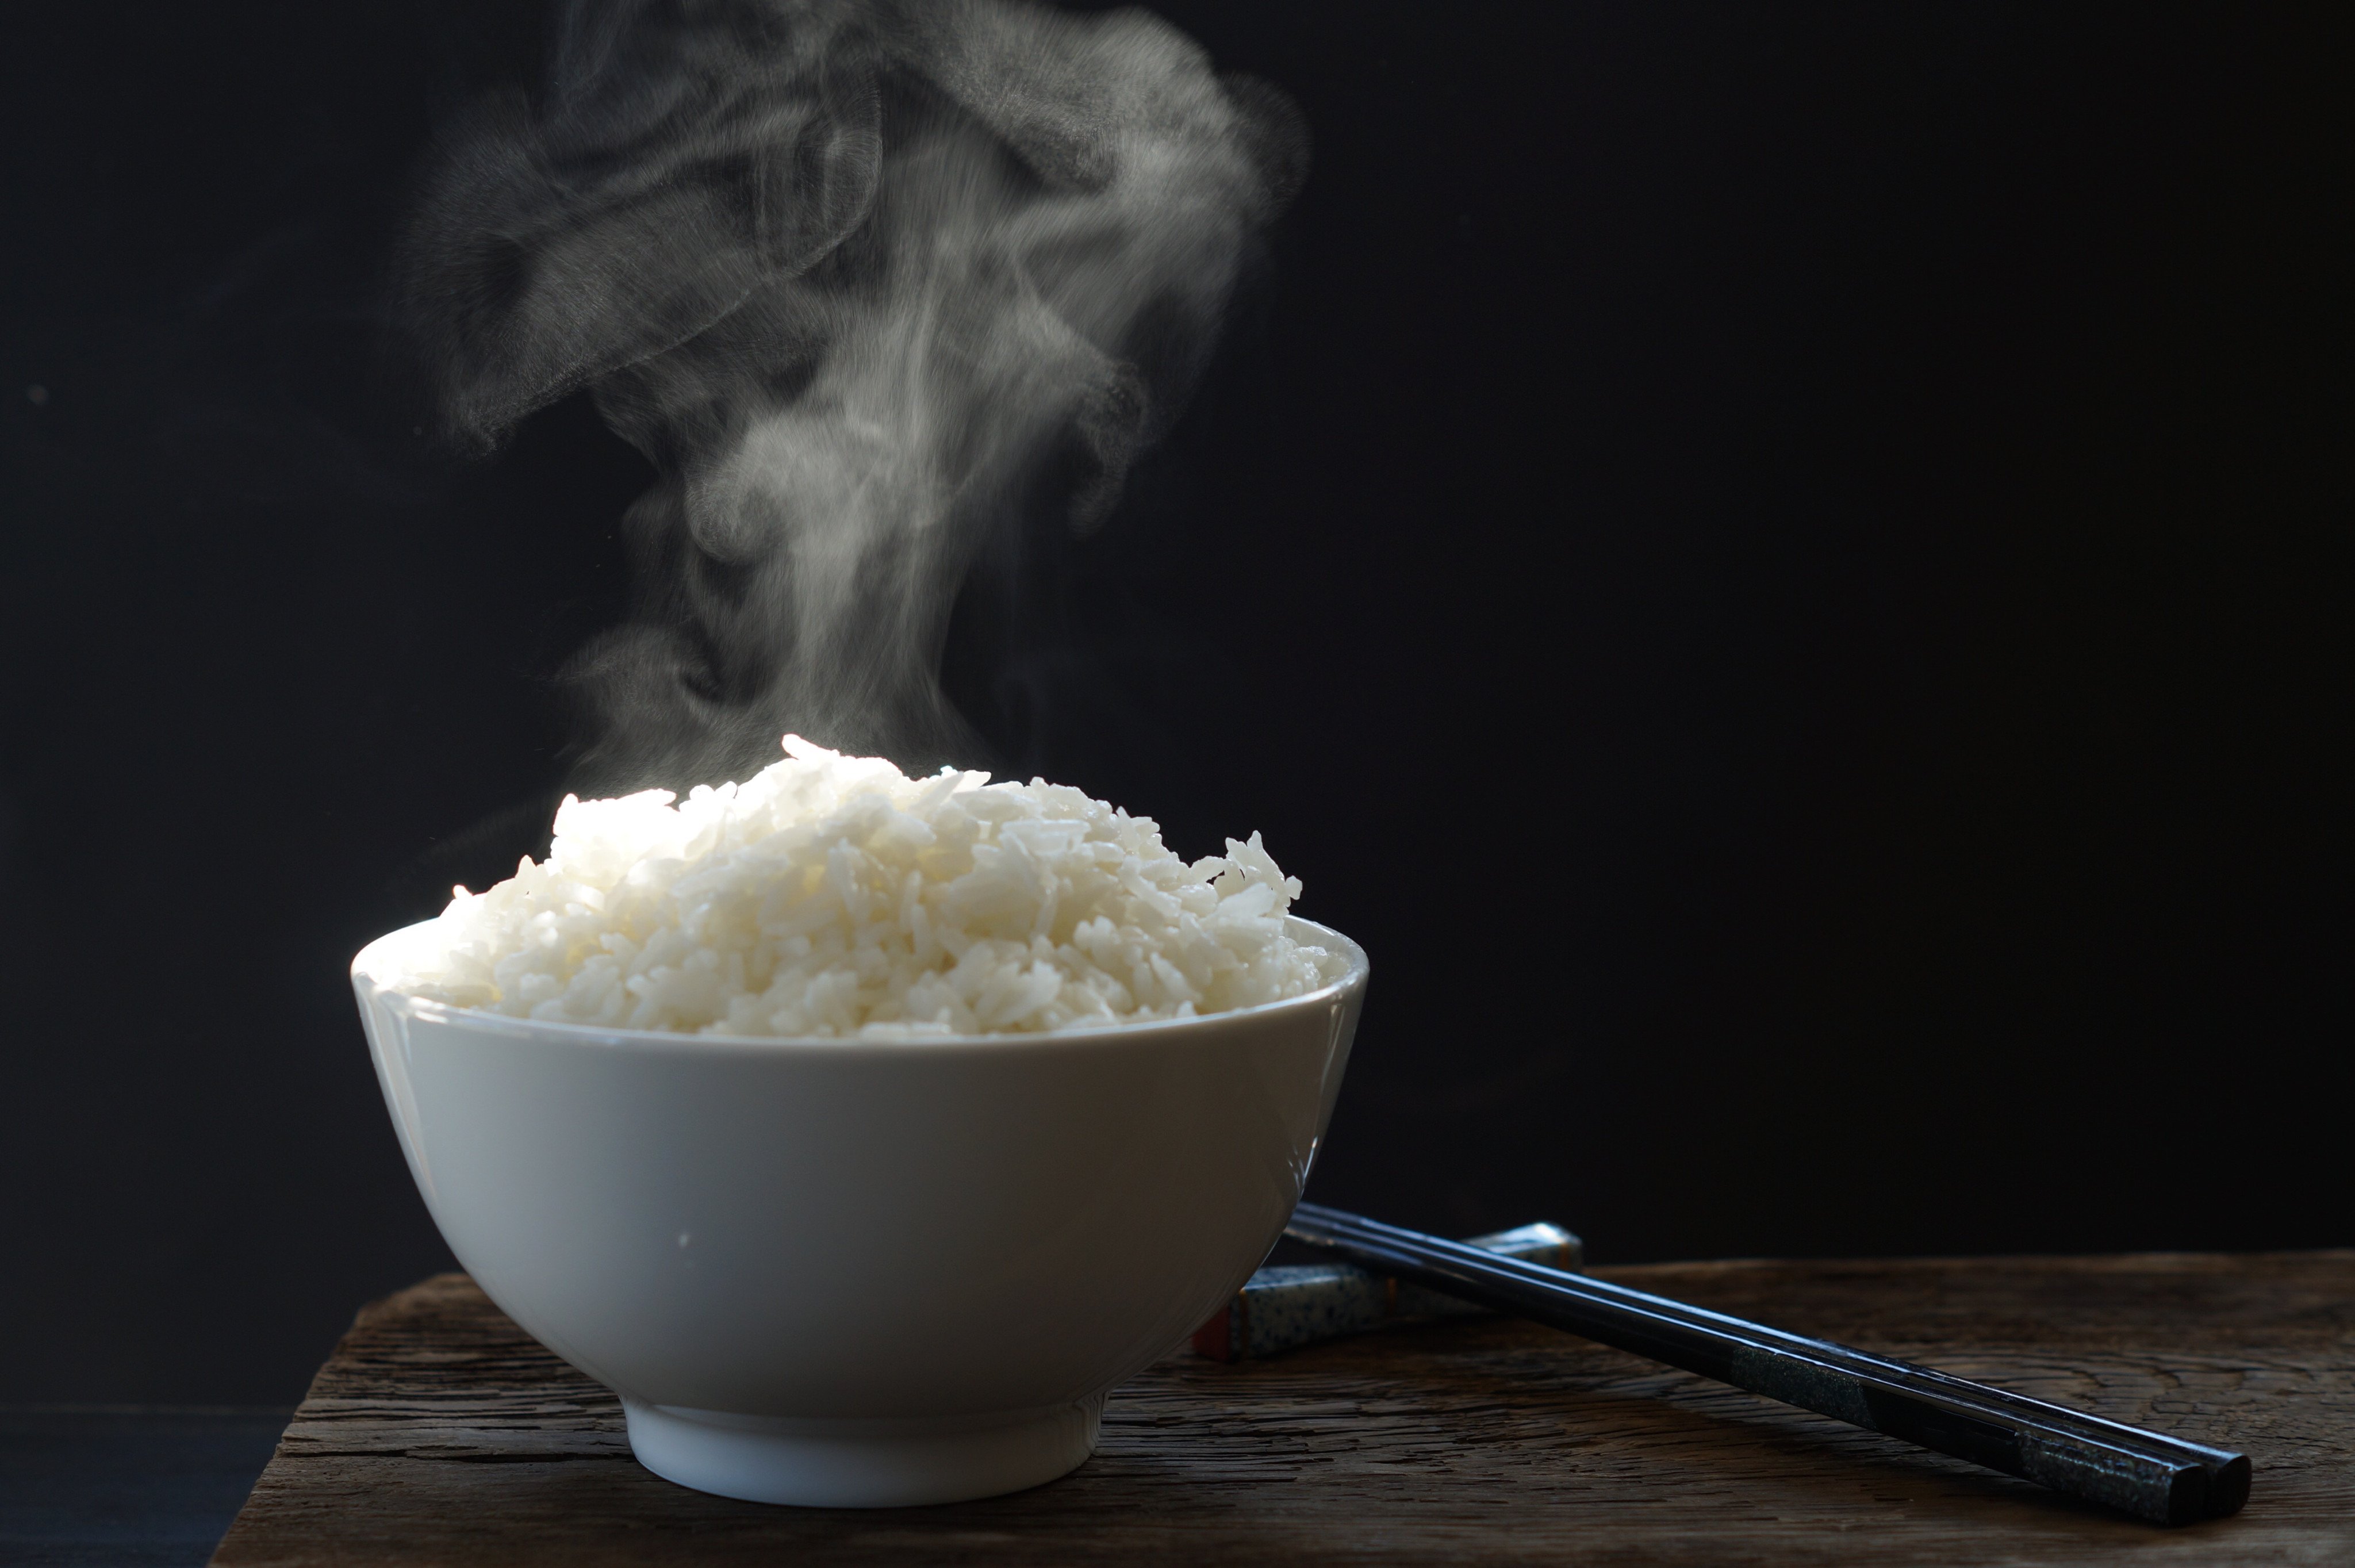 Chinese researchers have grown cultured meats on rice grains, with the resulting dishes “visually indistinguishable” from regular varieties. Photo: Shutterstock